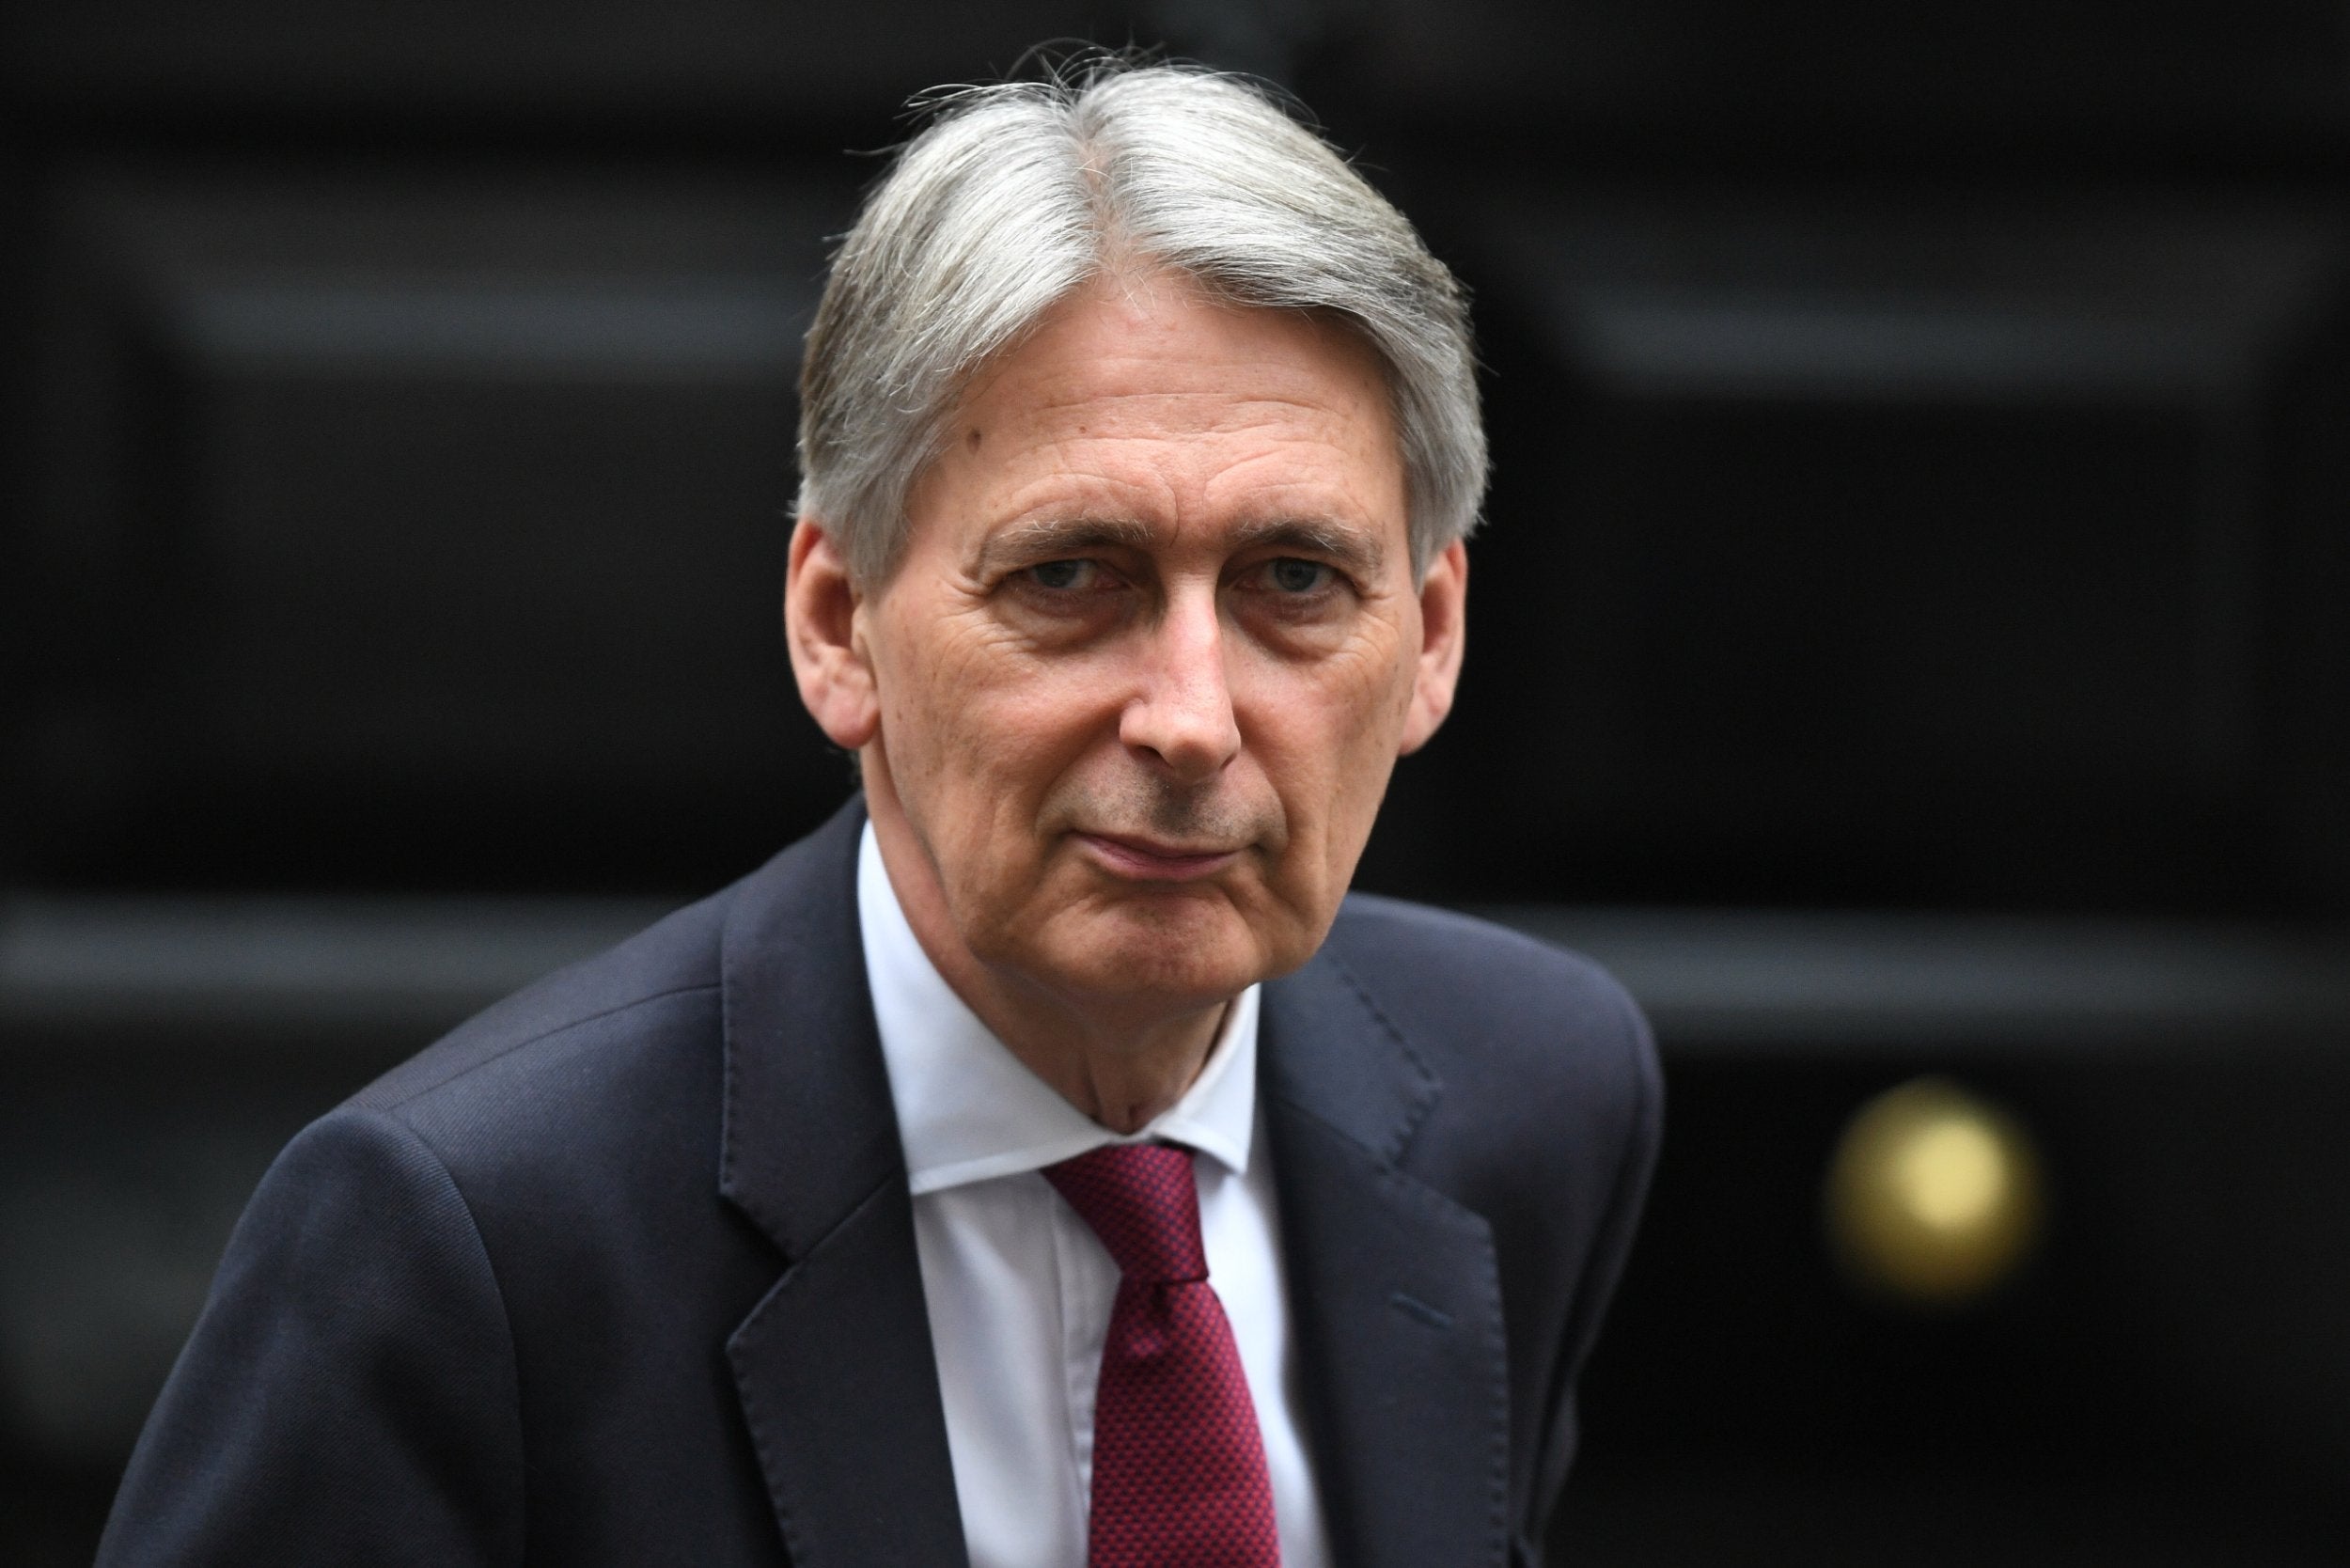 The are fears the chancellor could respond to the student loans accounting change by tightening repayment terms